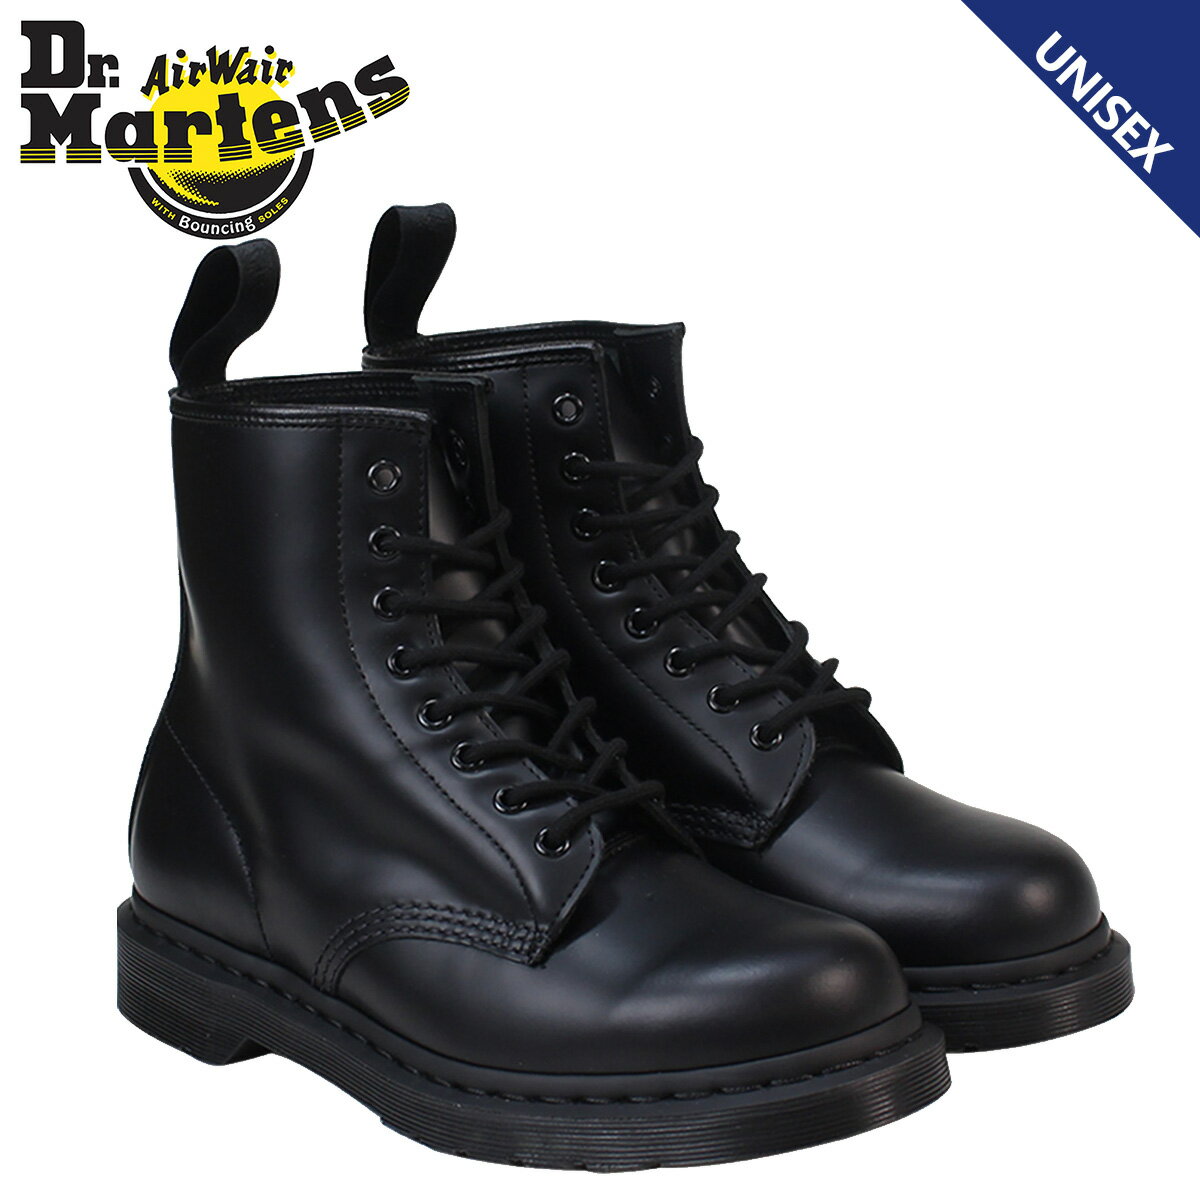 yő1000~OFFN[|zzz Dr.Martens 8z[ u[c hN^[}[` 1460 Y fB[X 8EYE MONO BOOT R14353001